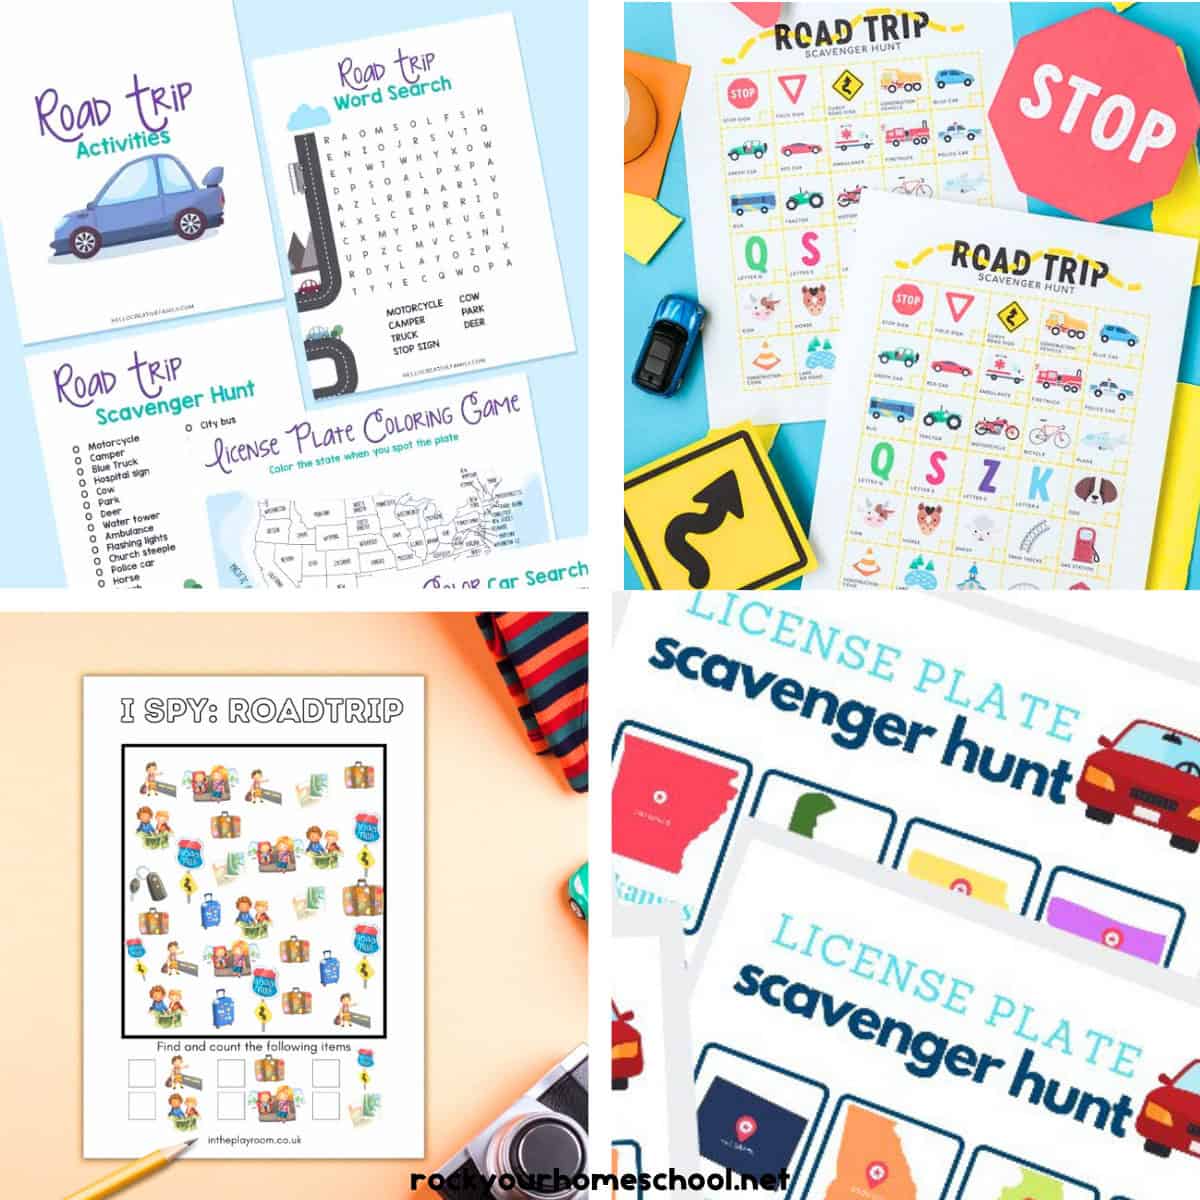 Four examples of free road trip printables for kids with license plate game, I Spy, scavenger hunt, and more.